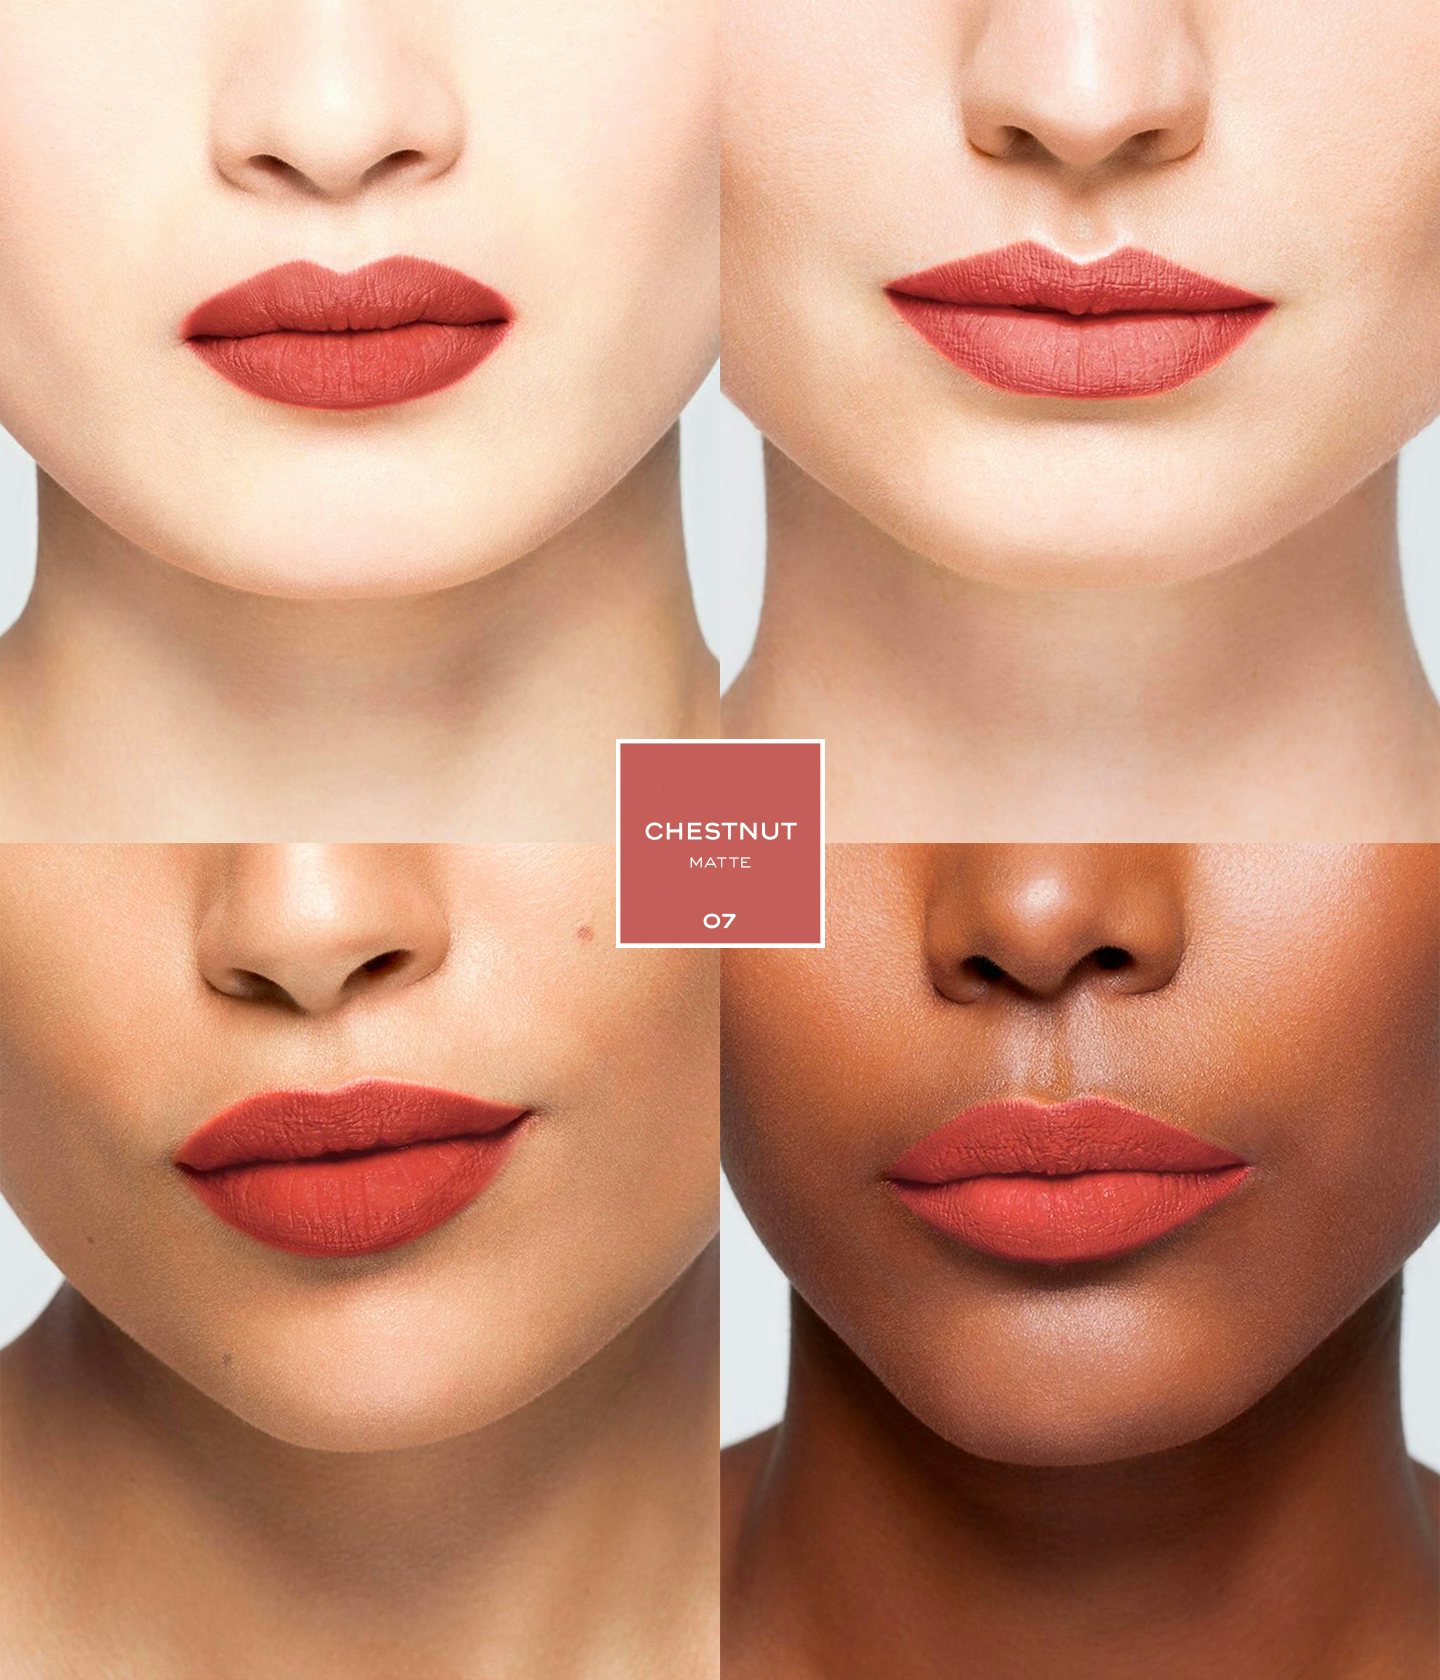 La bouche rouge Chestnut lipstick shade on different models with different skin tones